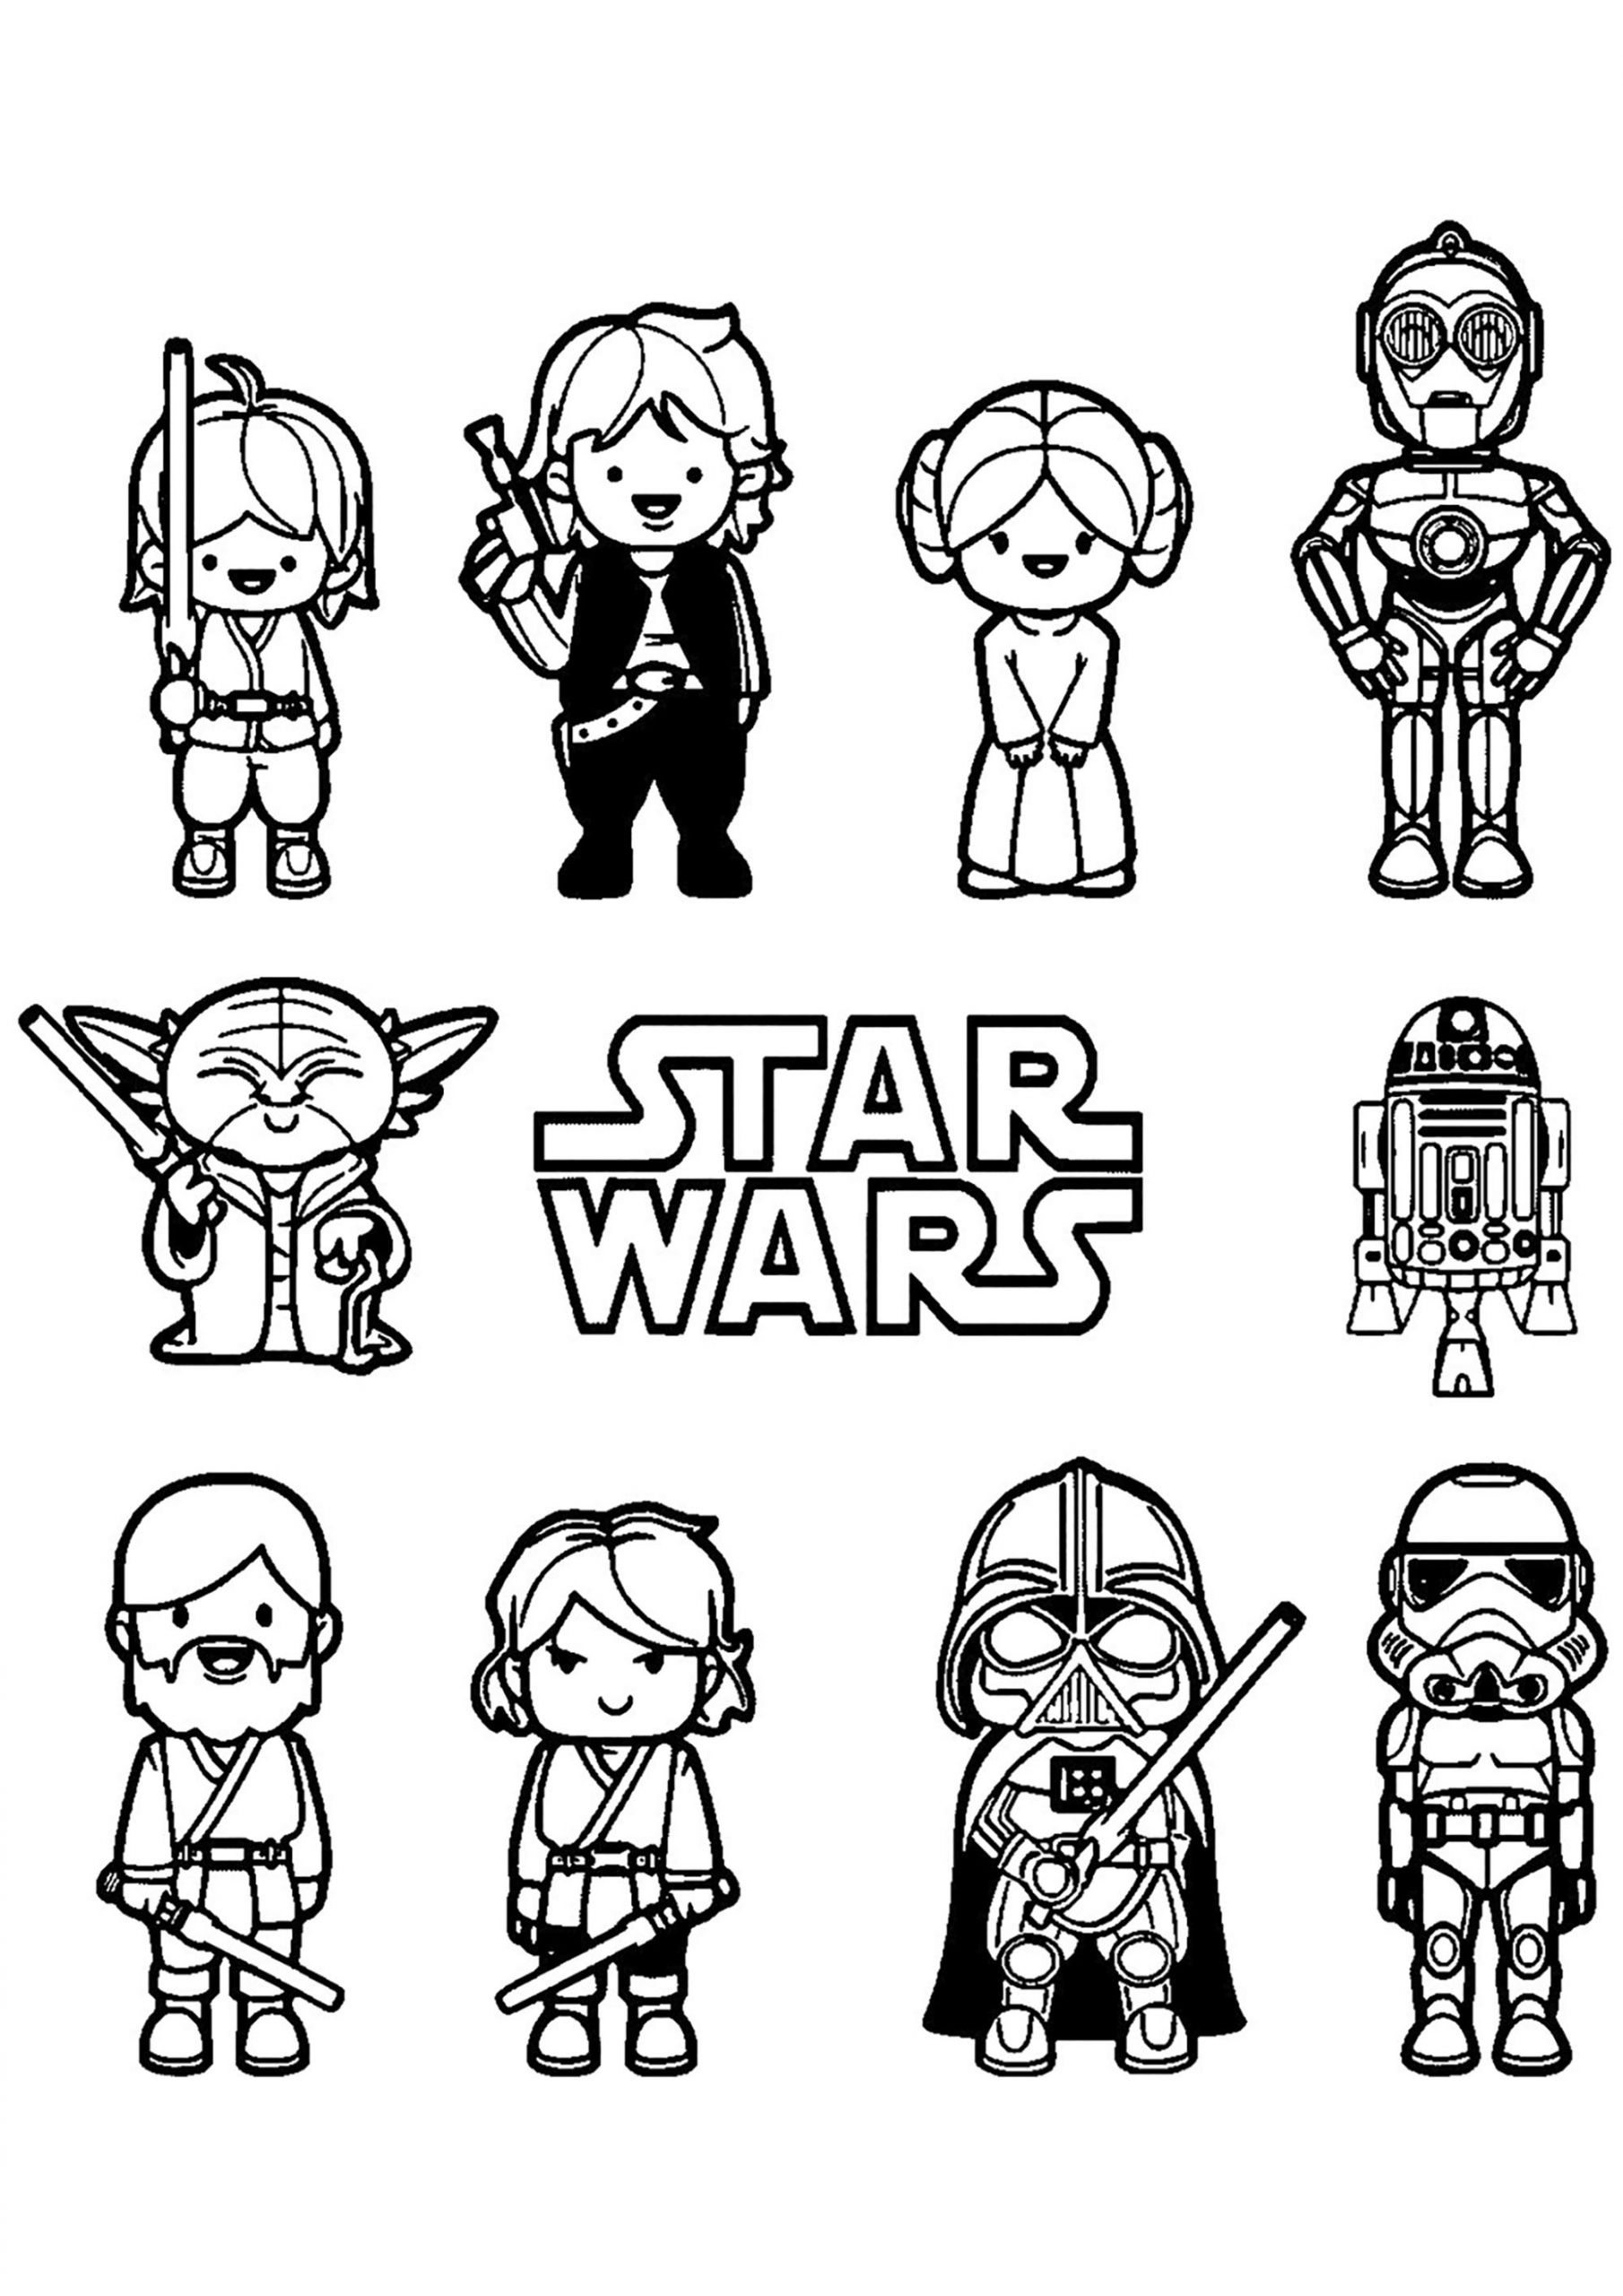 Star Wars Coloring Pages For Kids
 Star wars free to color for kids Star Wars Kids Coloring